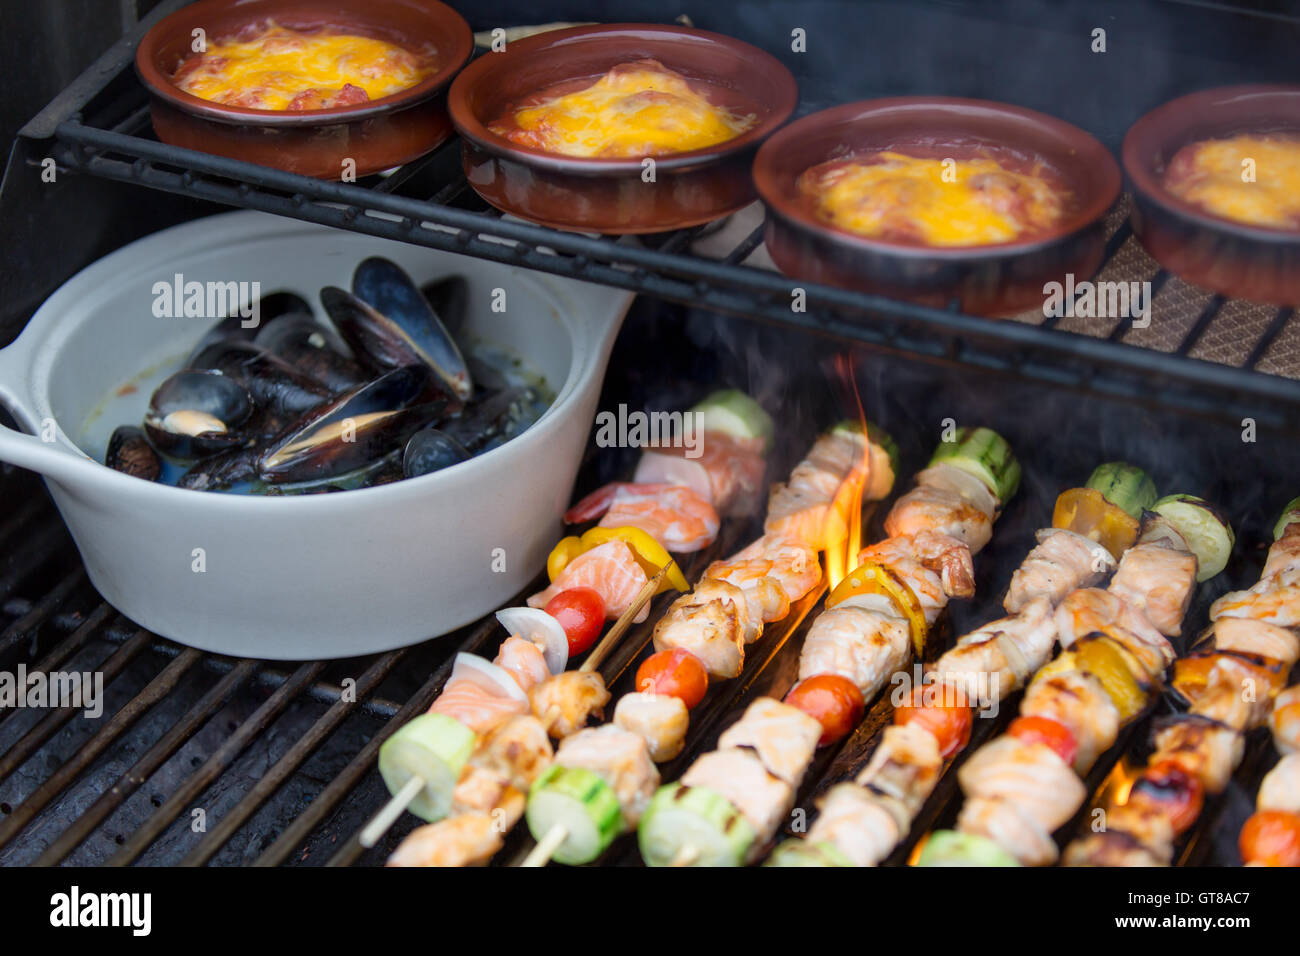 Delicious seafood outdoor meal at the BBQ with grilled salmon shish kebabs, marine mussels and individual pots of sausage stew, Stock Photo